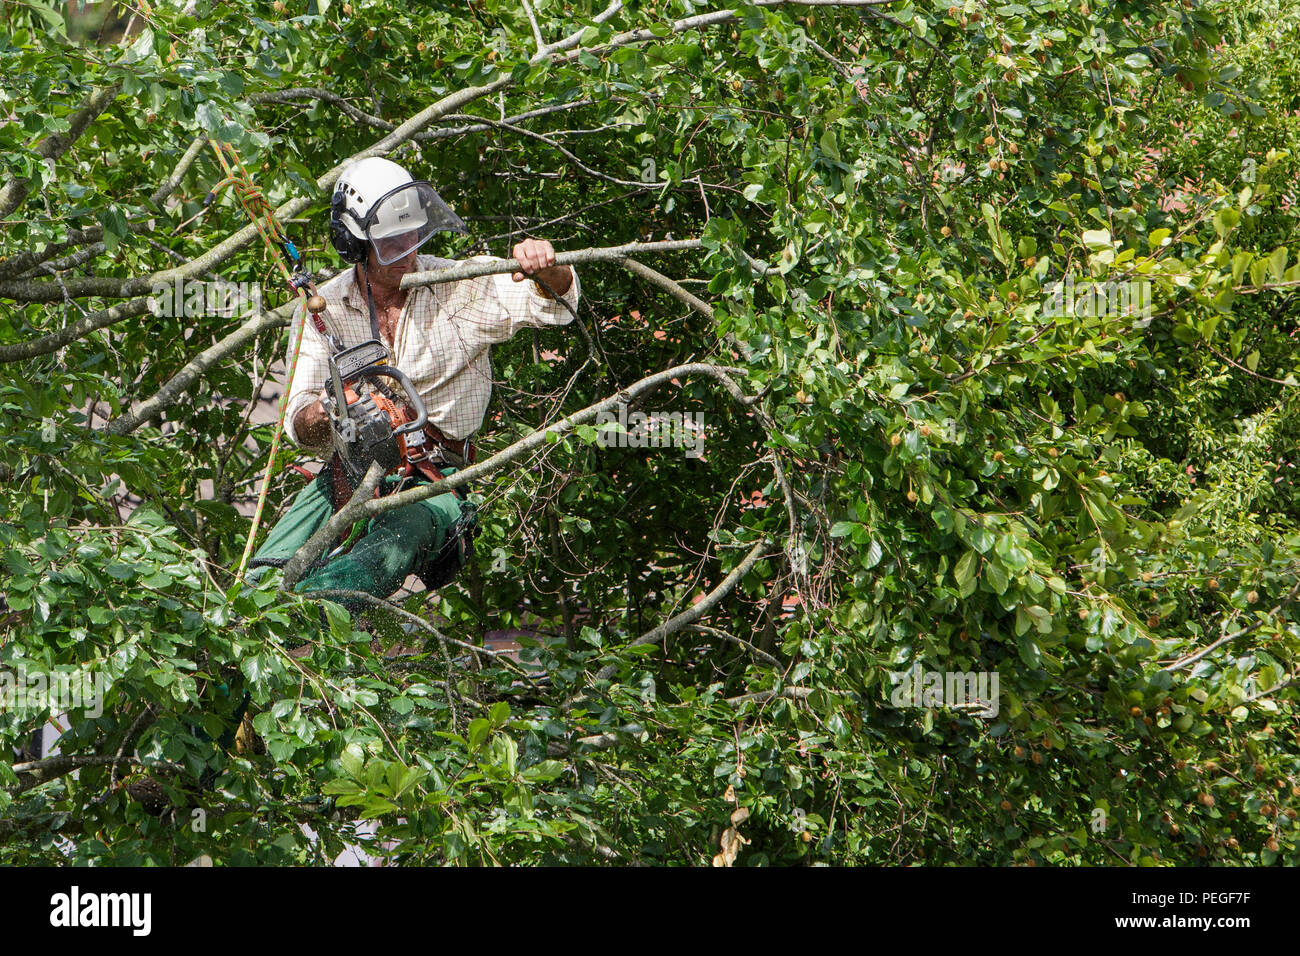 A tree surgeon arborist arboriculturist is pictured as he cuts down a tree in Chippenham, Wilts. Stock Photo